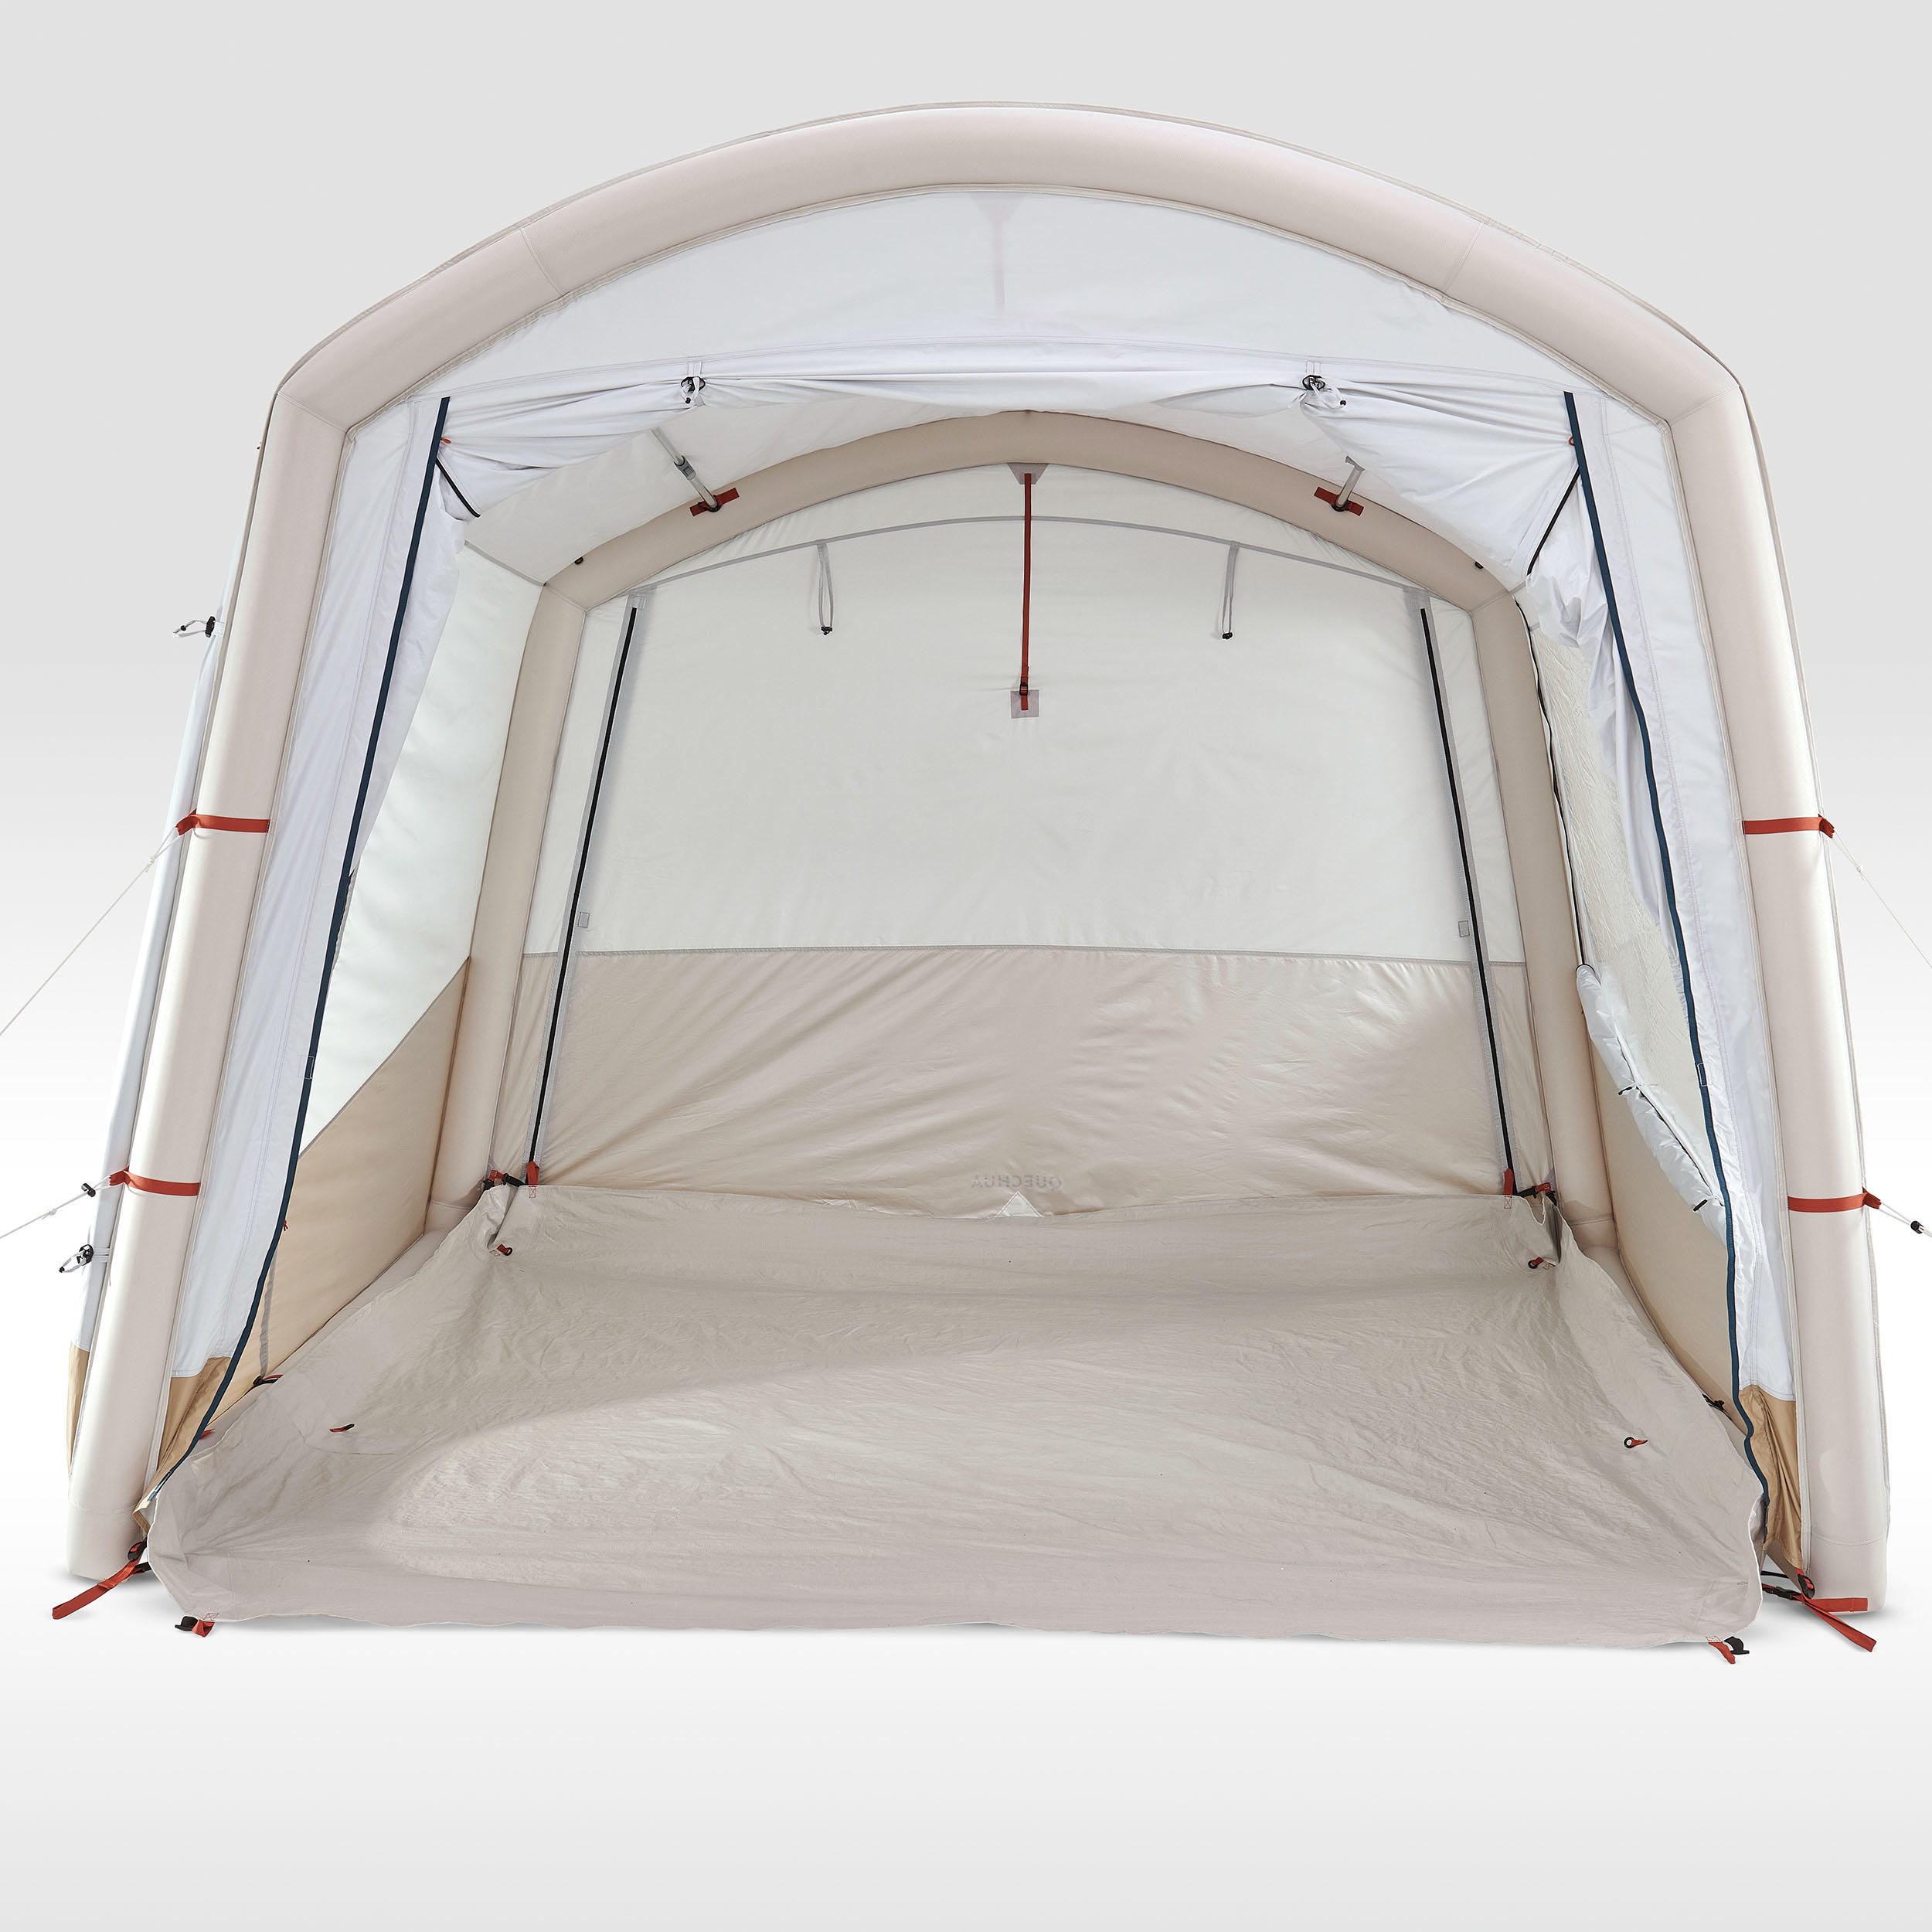 Inflatable Camping Living Room - Air Seconds Base Connect Fresh - 6 people 9/13